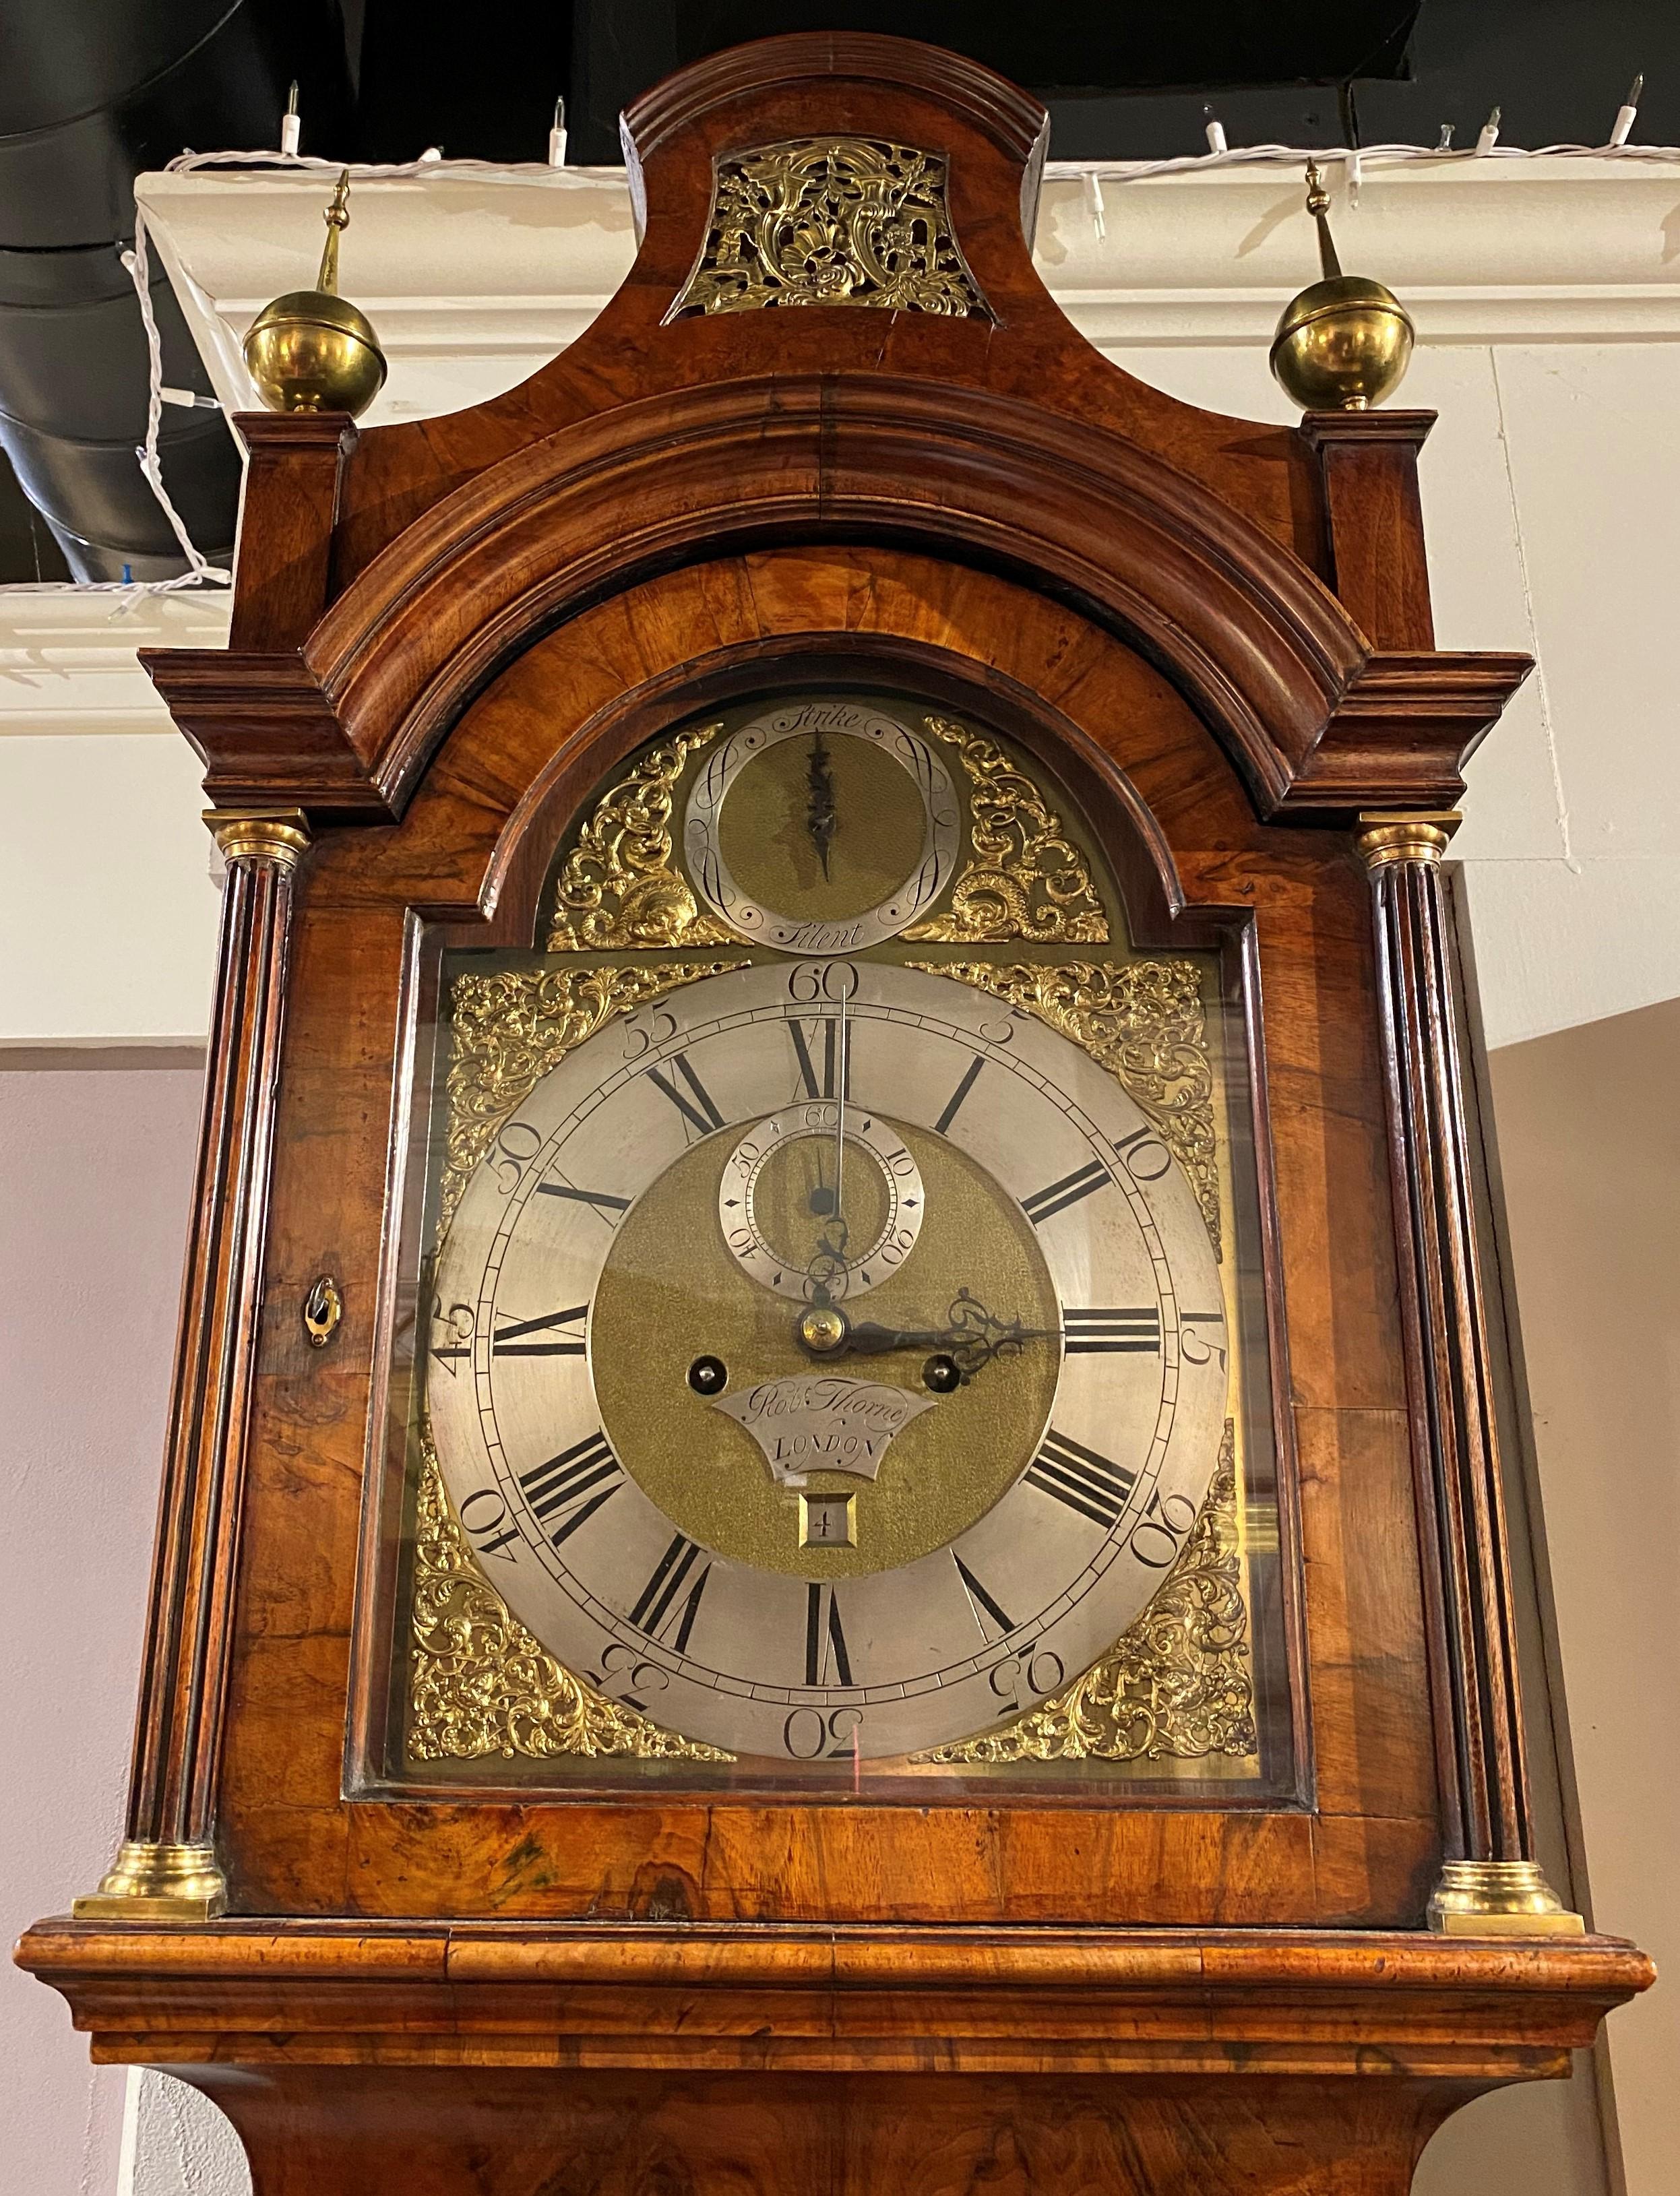 A stunning burled walnut tall case clock with pagoda form bonnet featuring a pierce-carved gilt central panel flanked by two ball and spire brass finials, surmounting an arched glass door, opening to an arched chased metal clock face with Roman